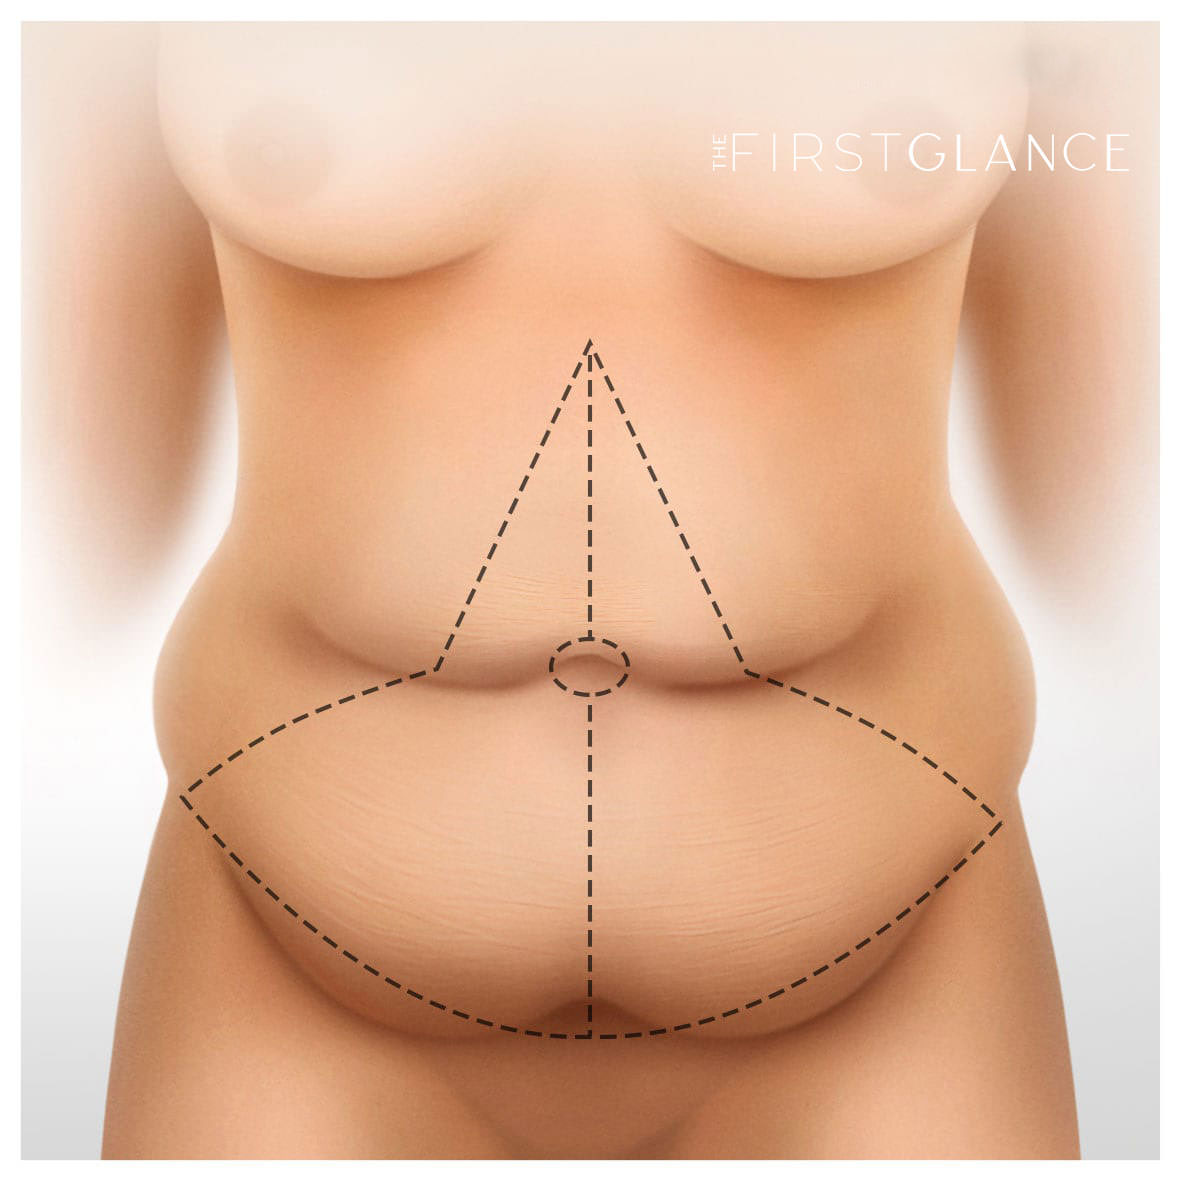 First Glance Aesthetic Clinic tummy tuck